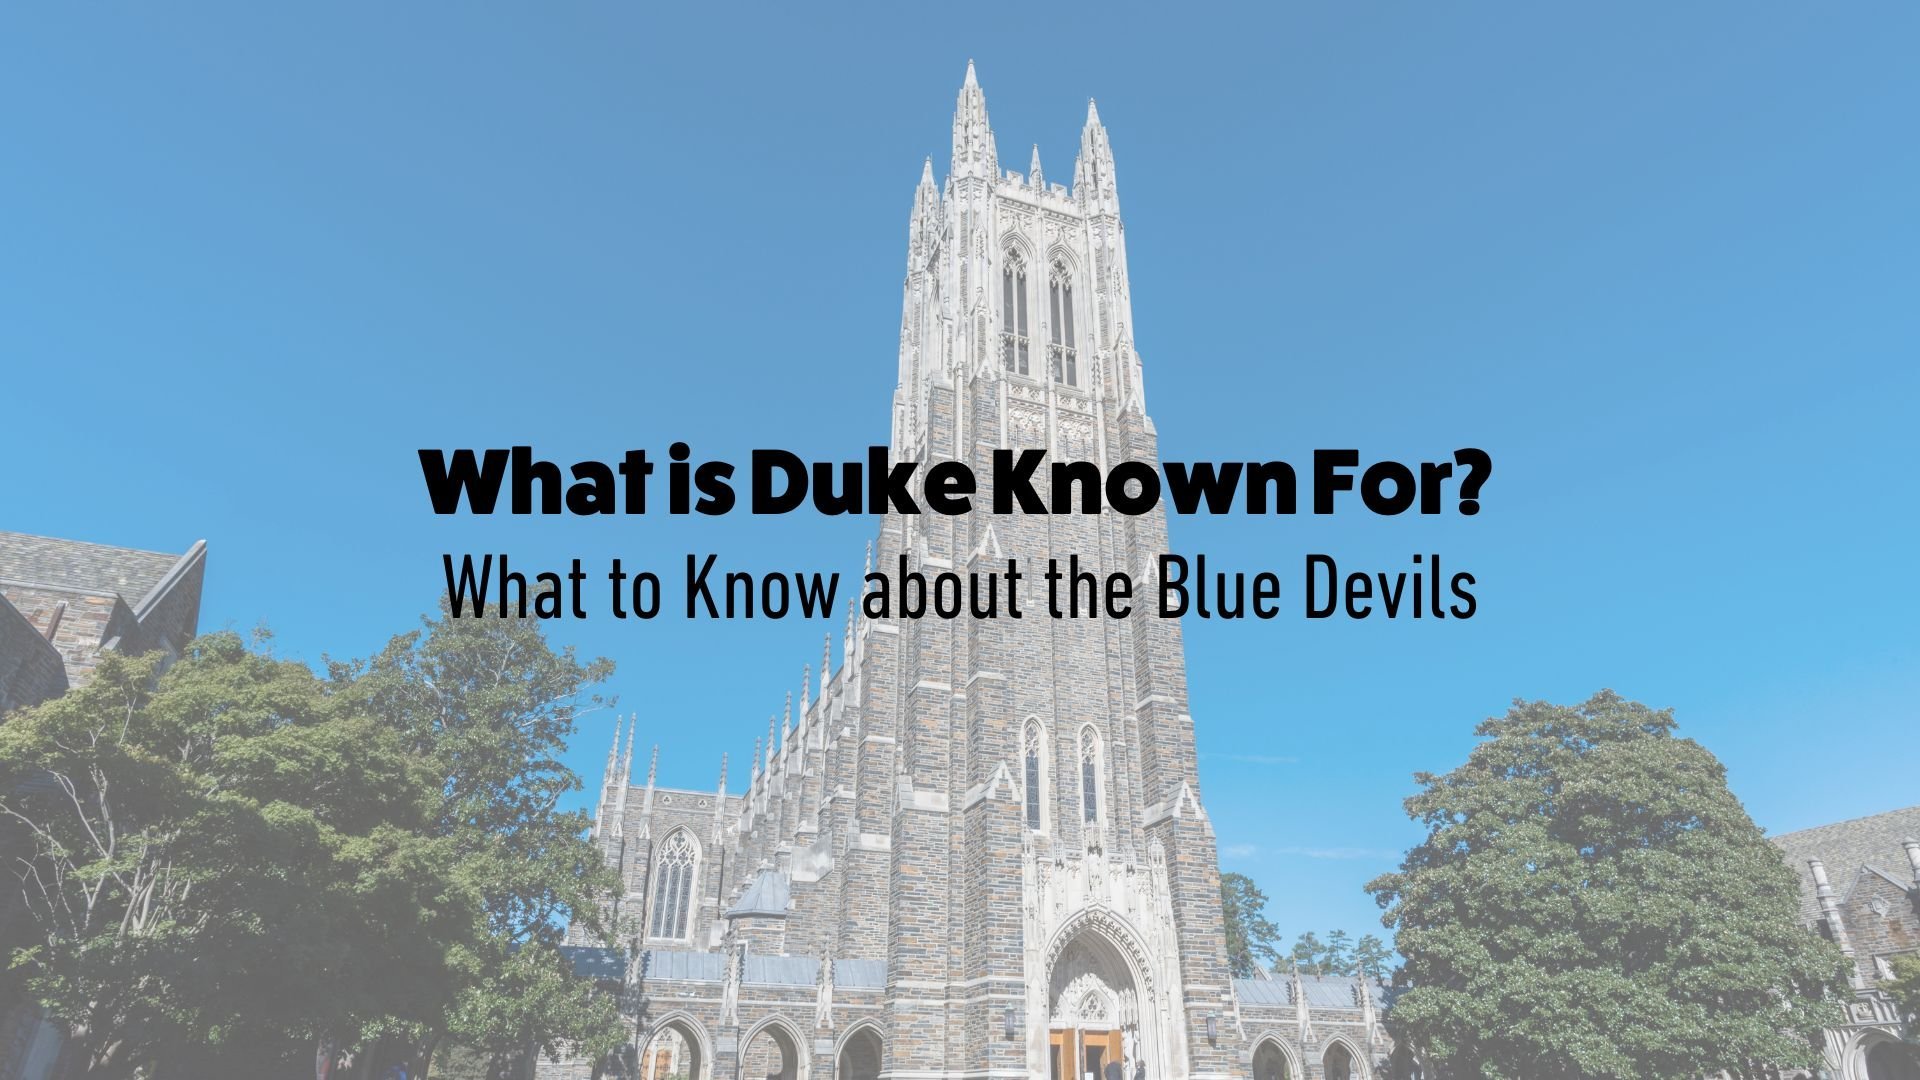 Duke University - A Great Place For Students and Scholars